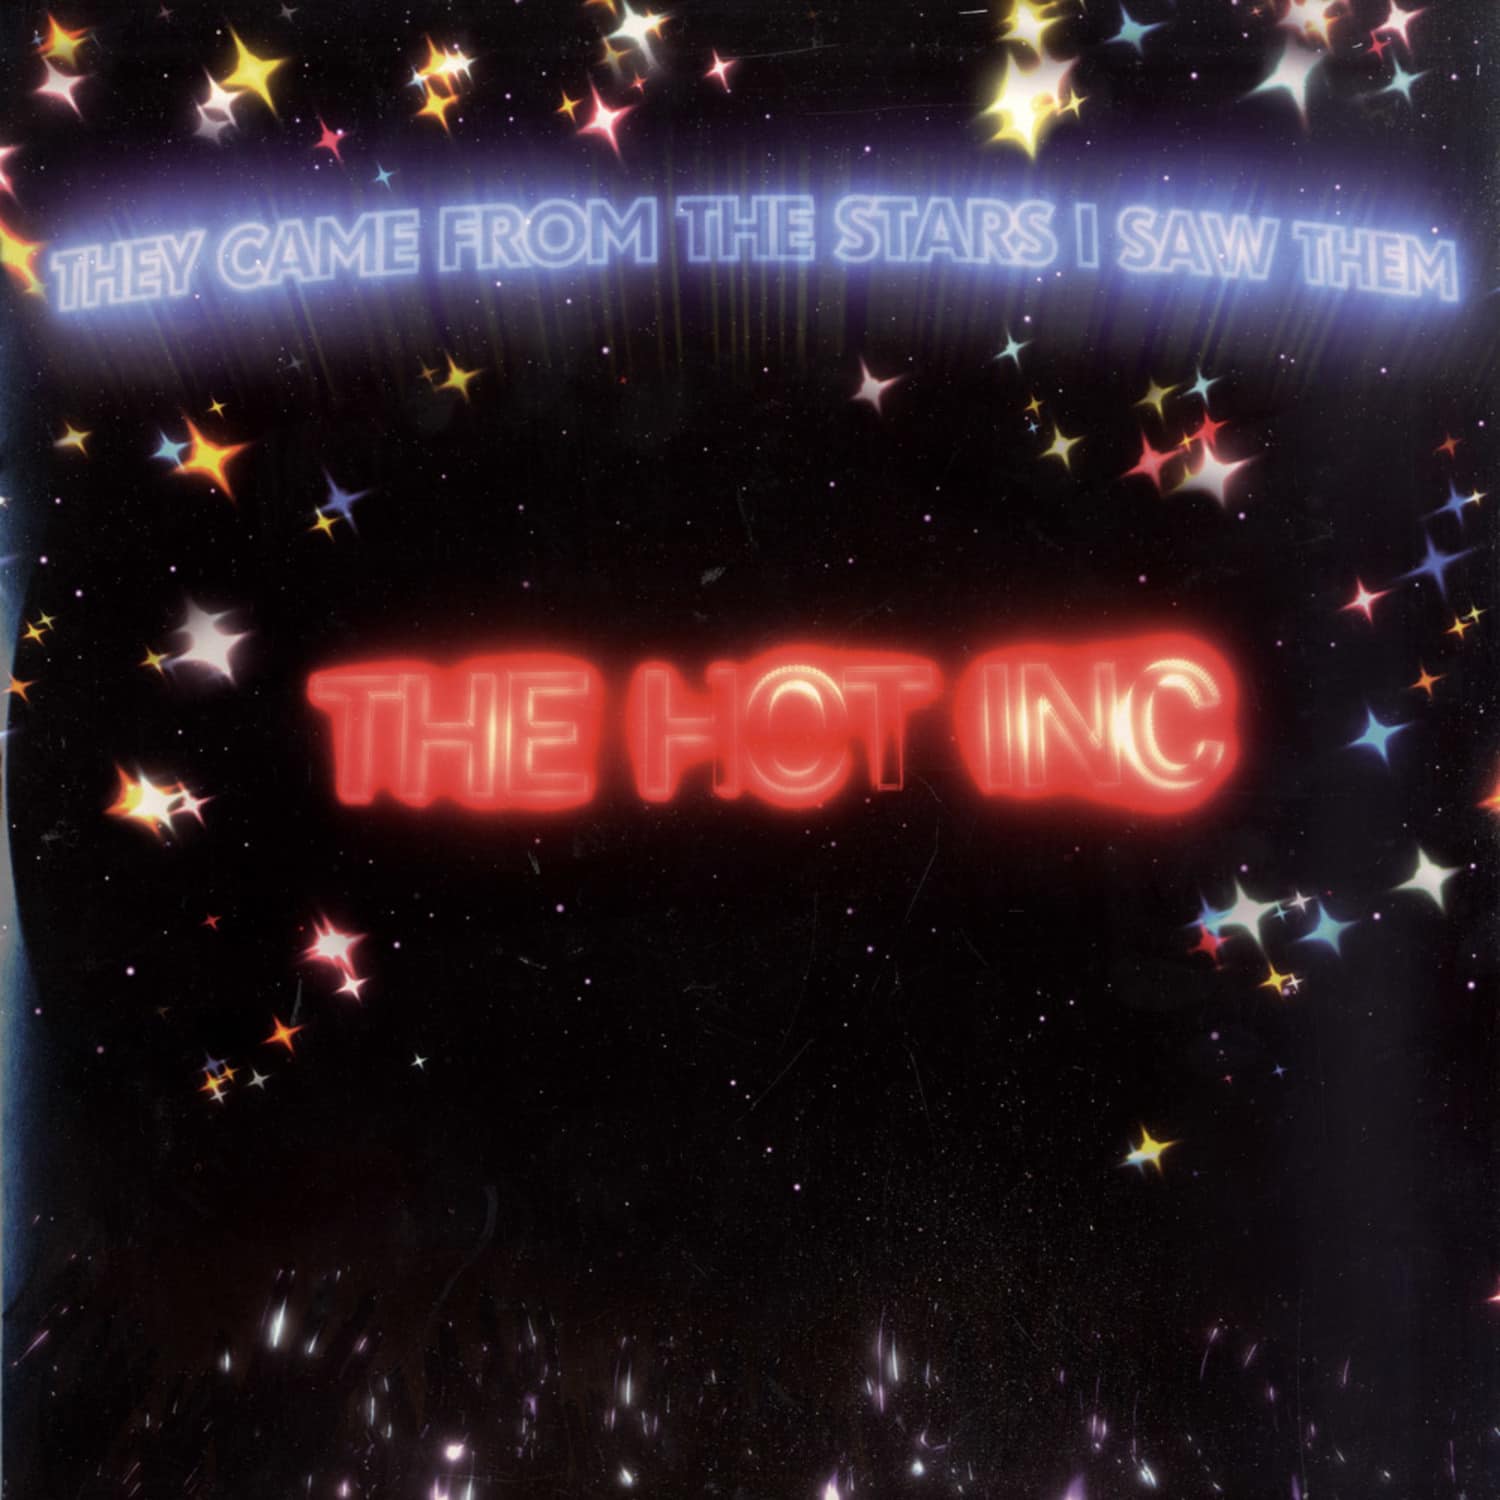 They Came From The Stars I Saw Them - THE HOT INC